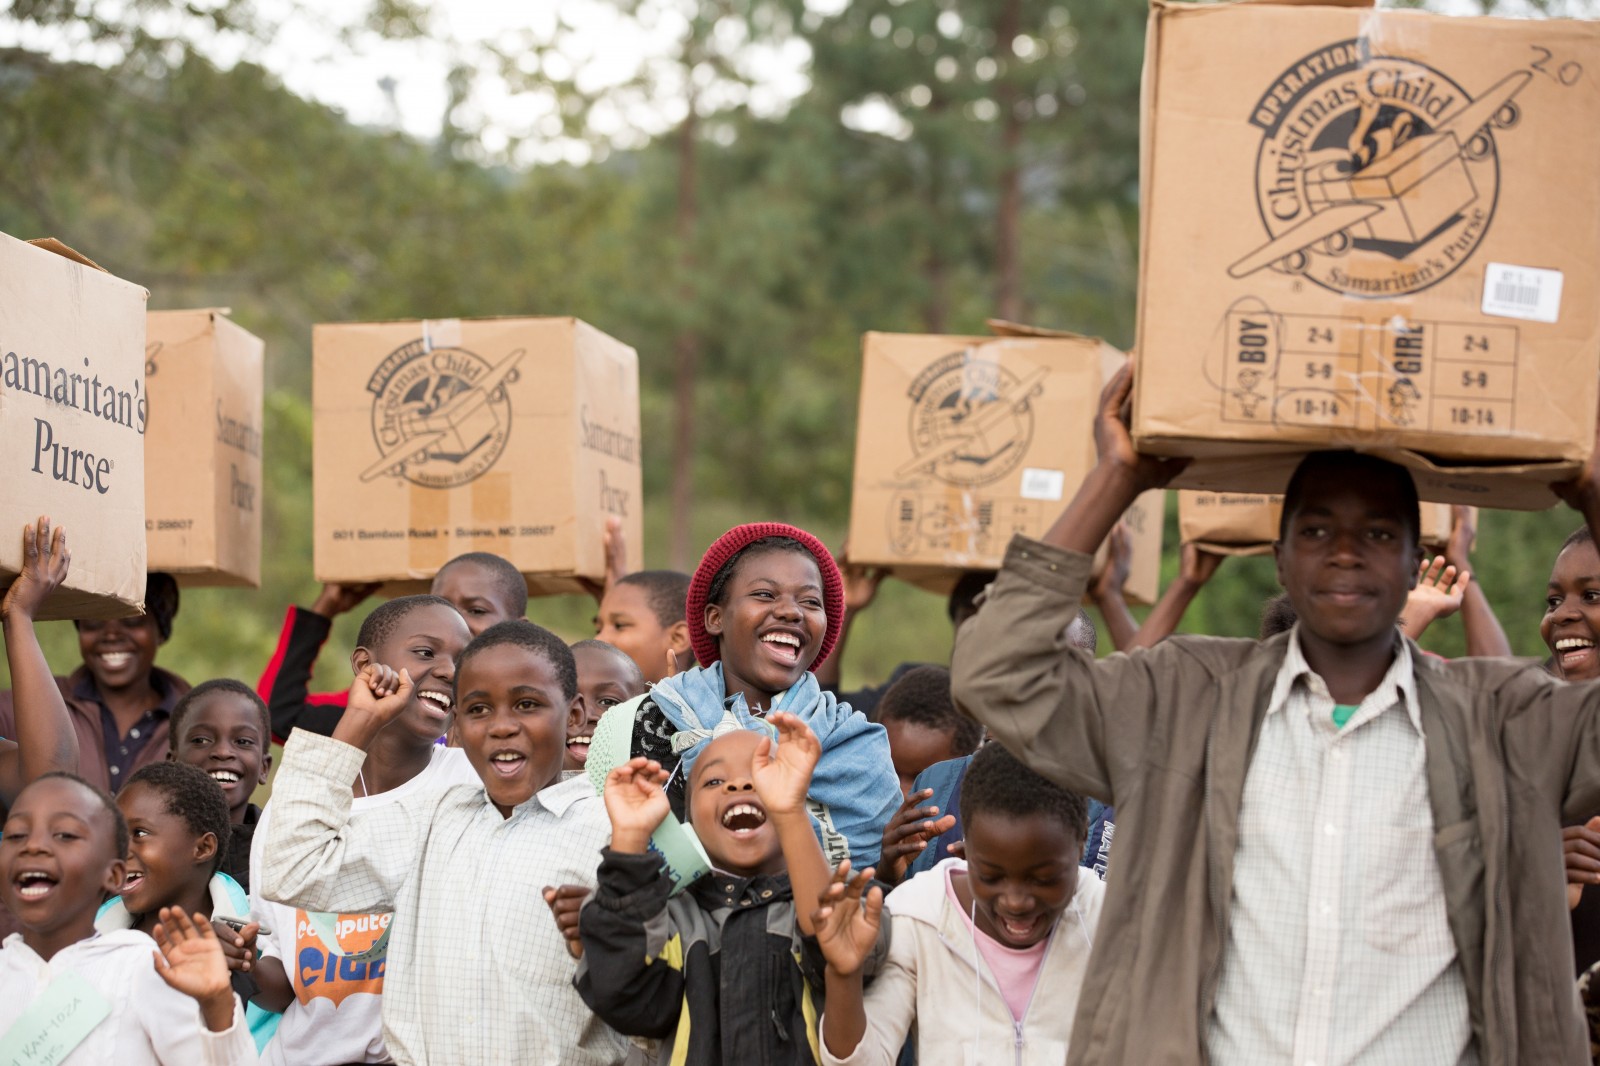 Using special tracking technology, participants can discover where in the world their gifts will be delivered to children in need. Boxes can be registered at samaritanspurse.org. (photo: Malawi)